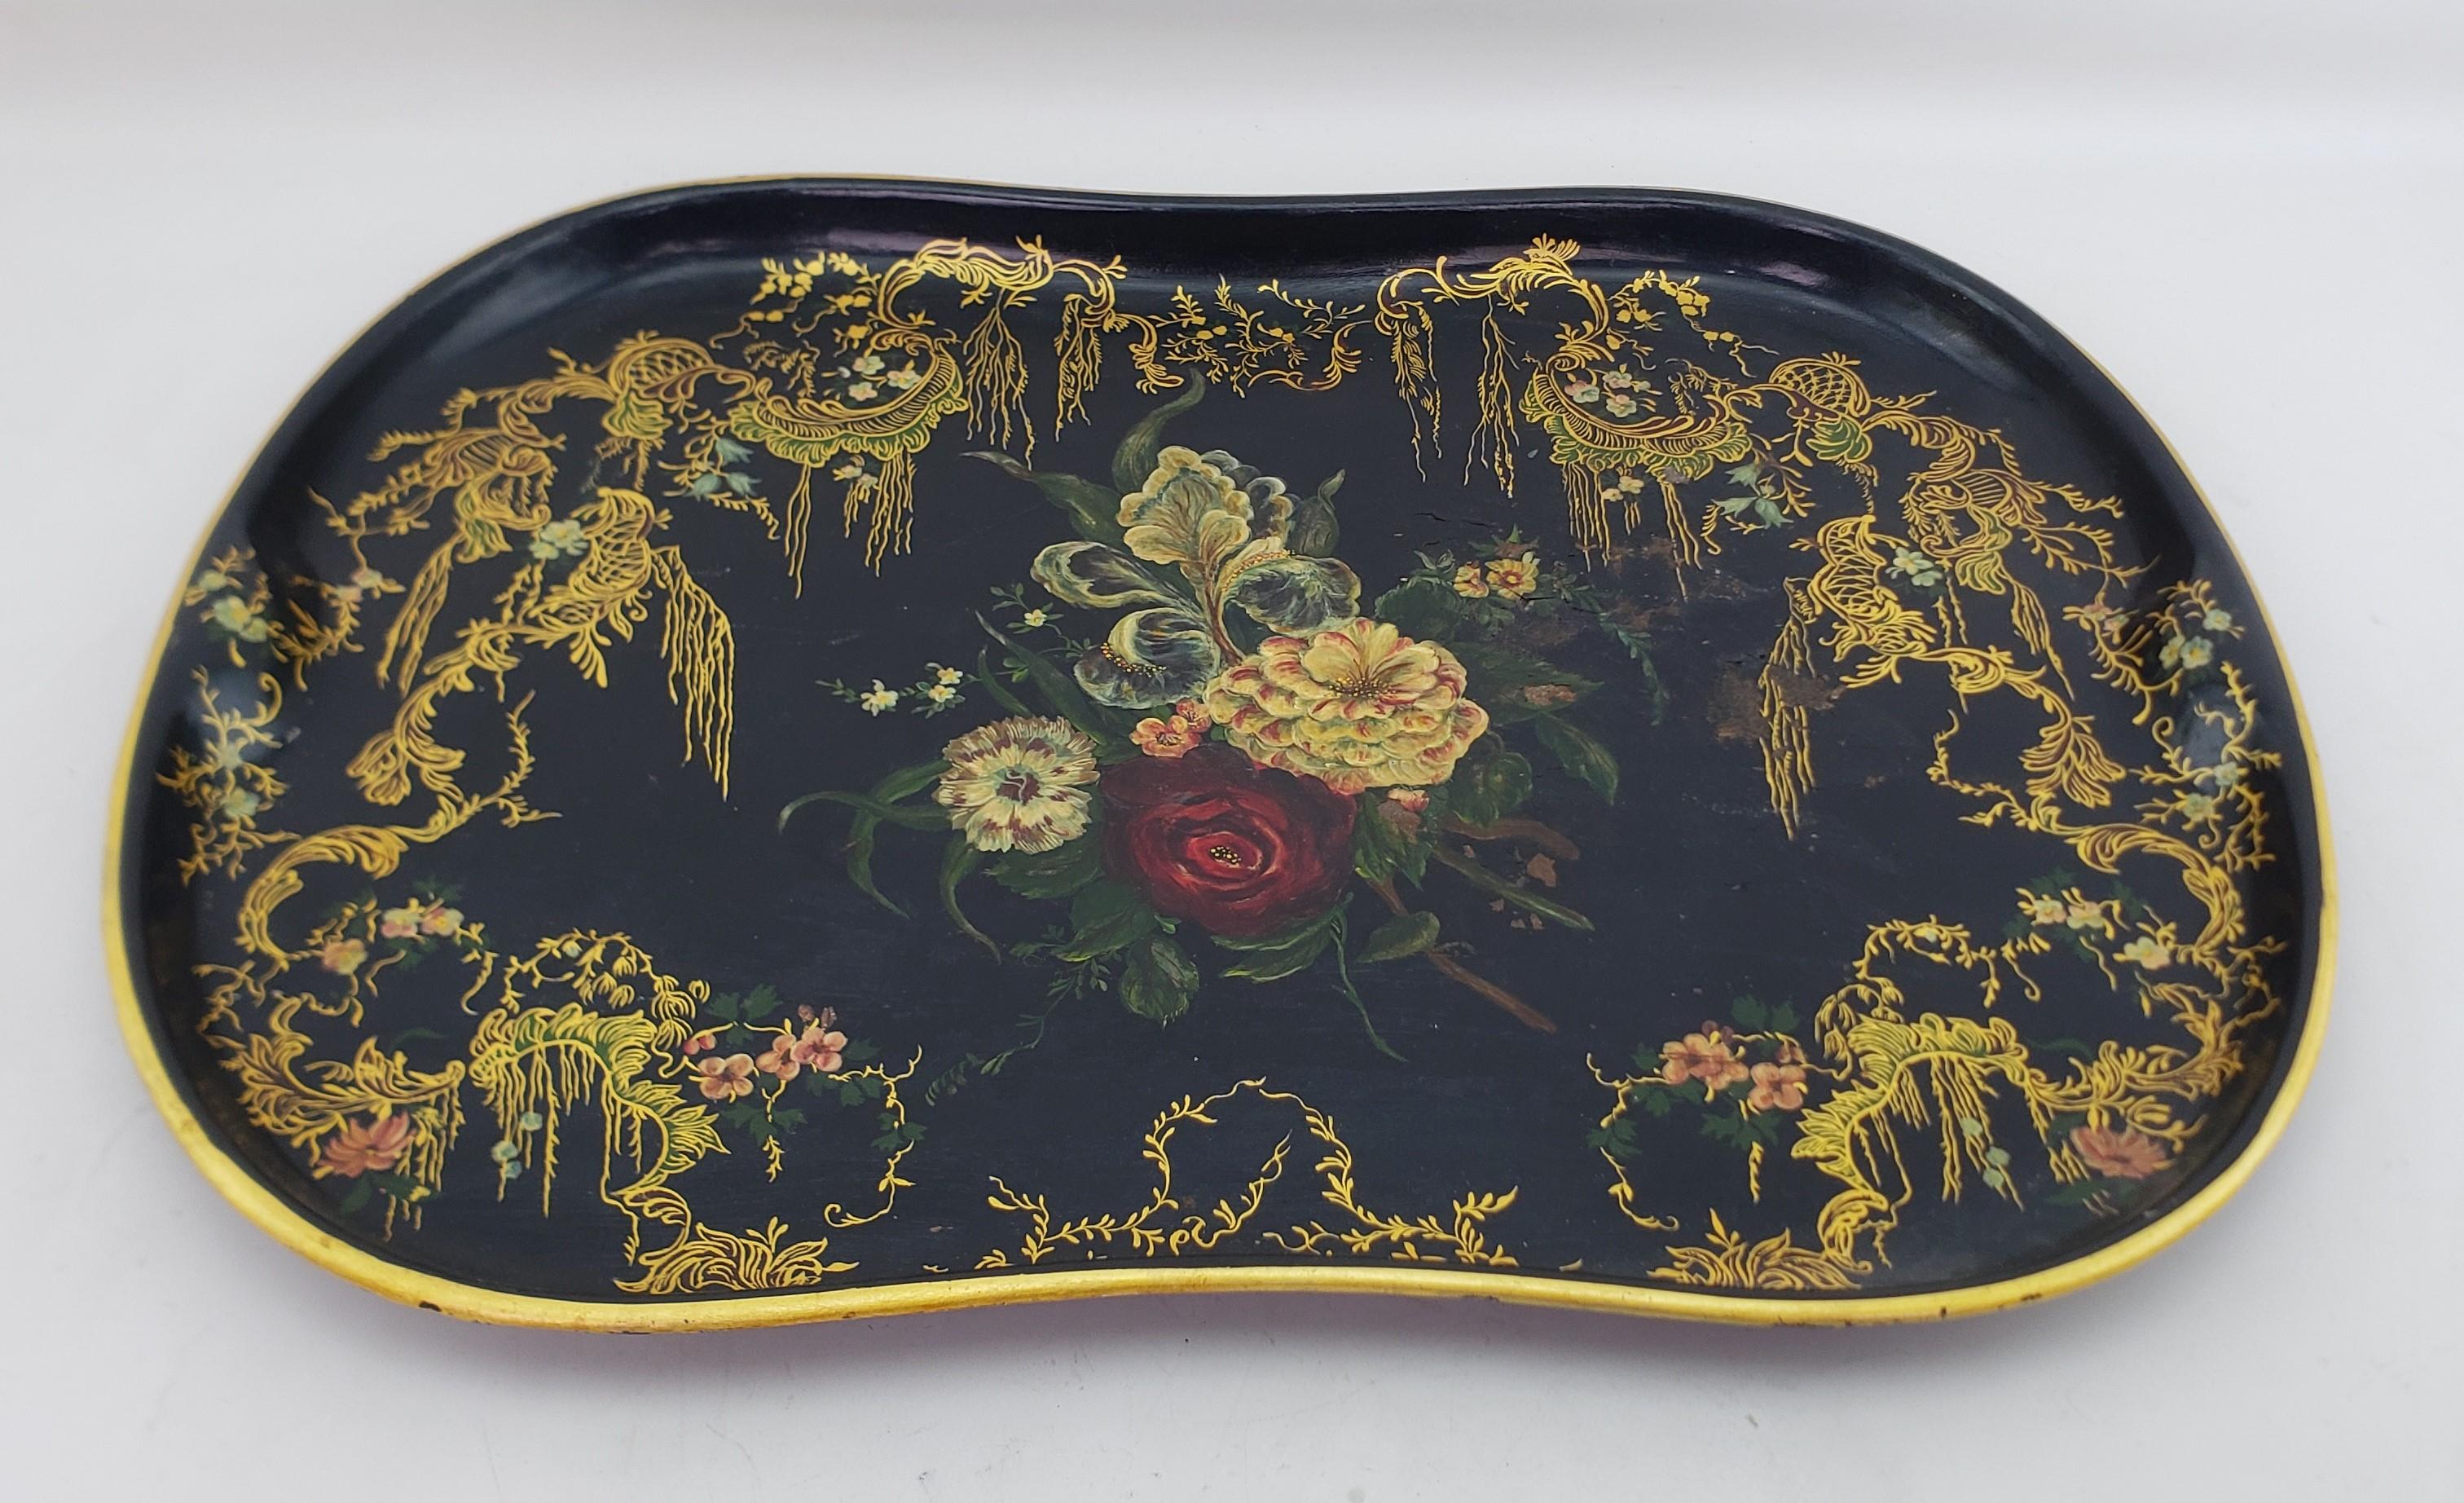 Machine-Made Large Antique Toleware Serving Tray with Floral Decoration & Gilt Accents For Sale